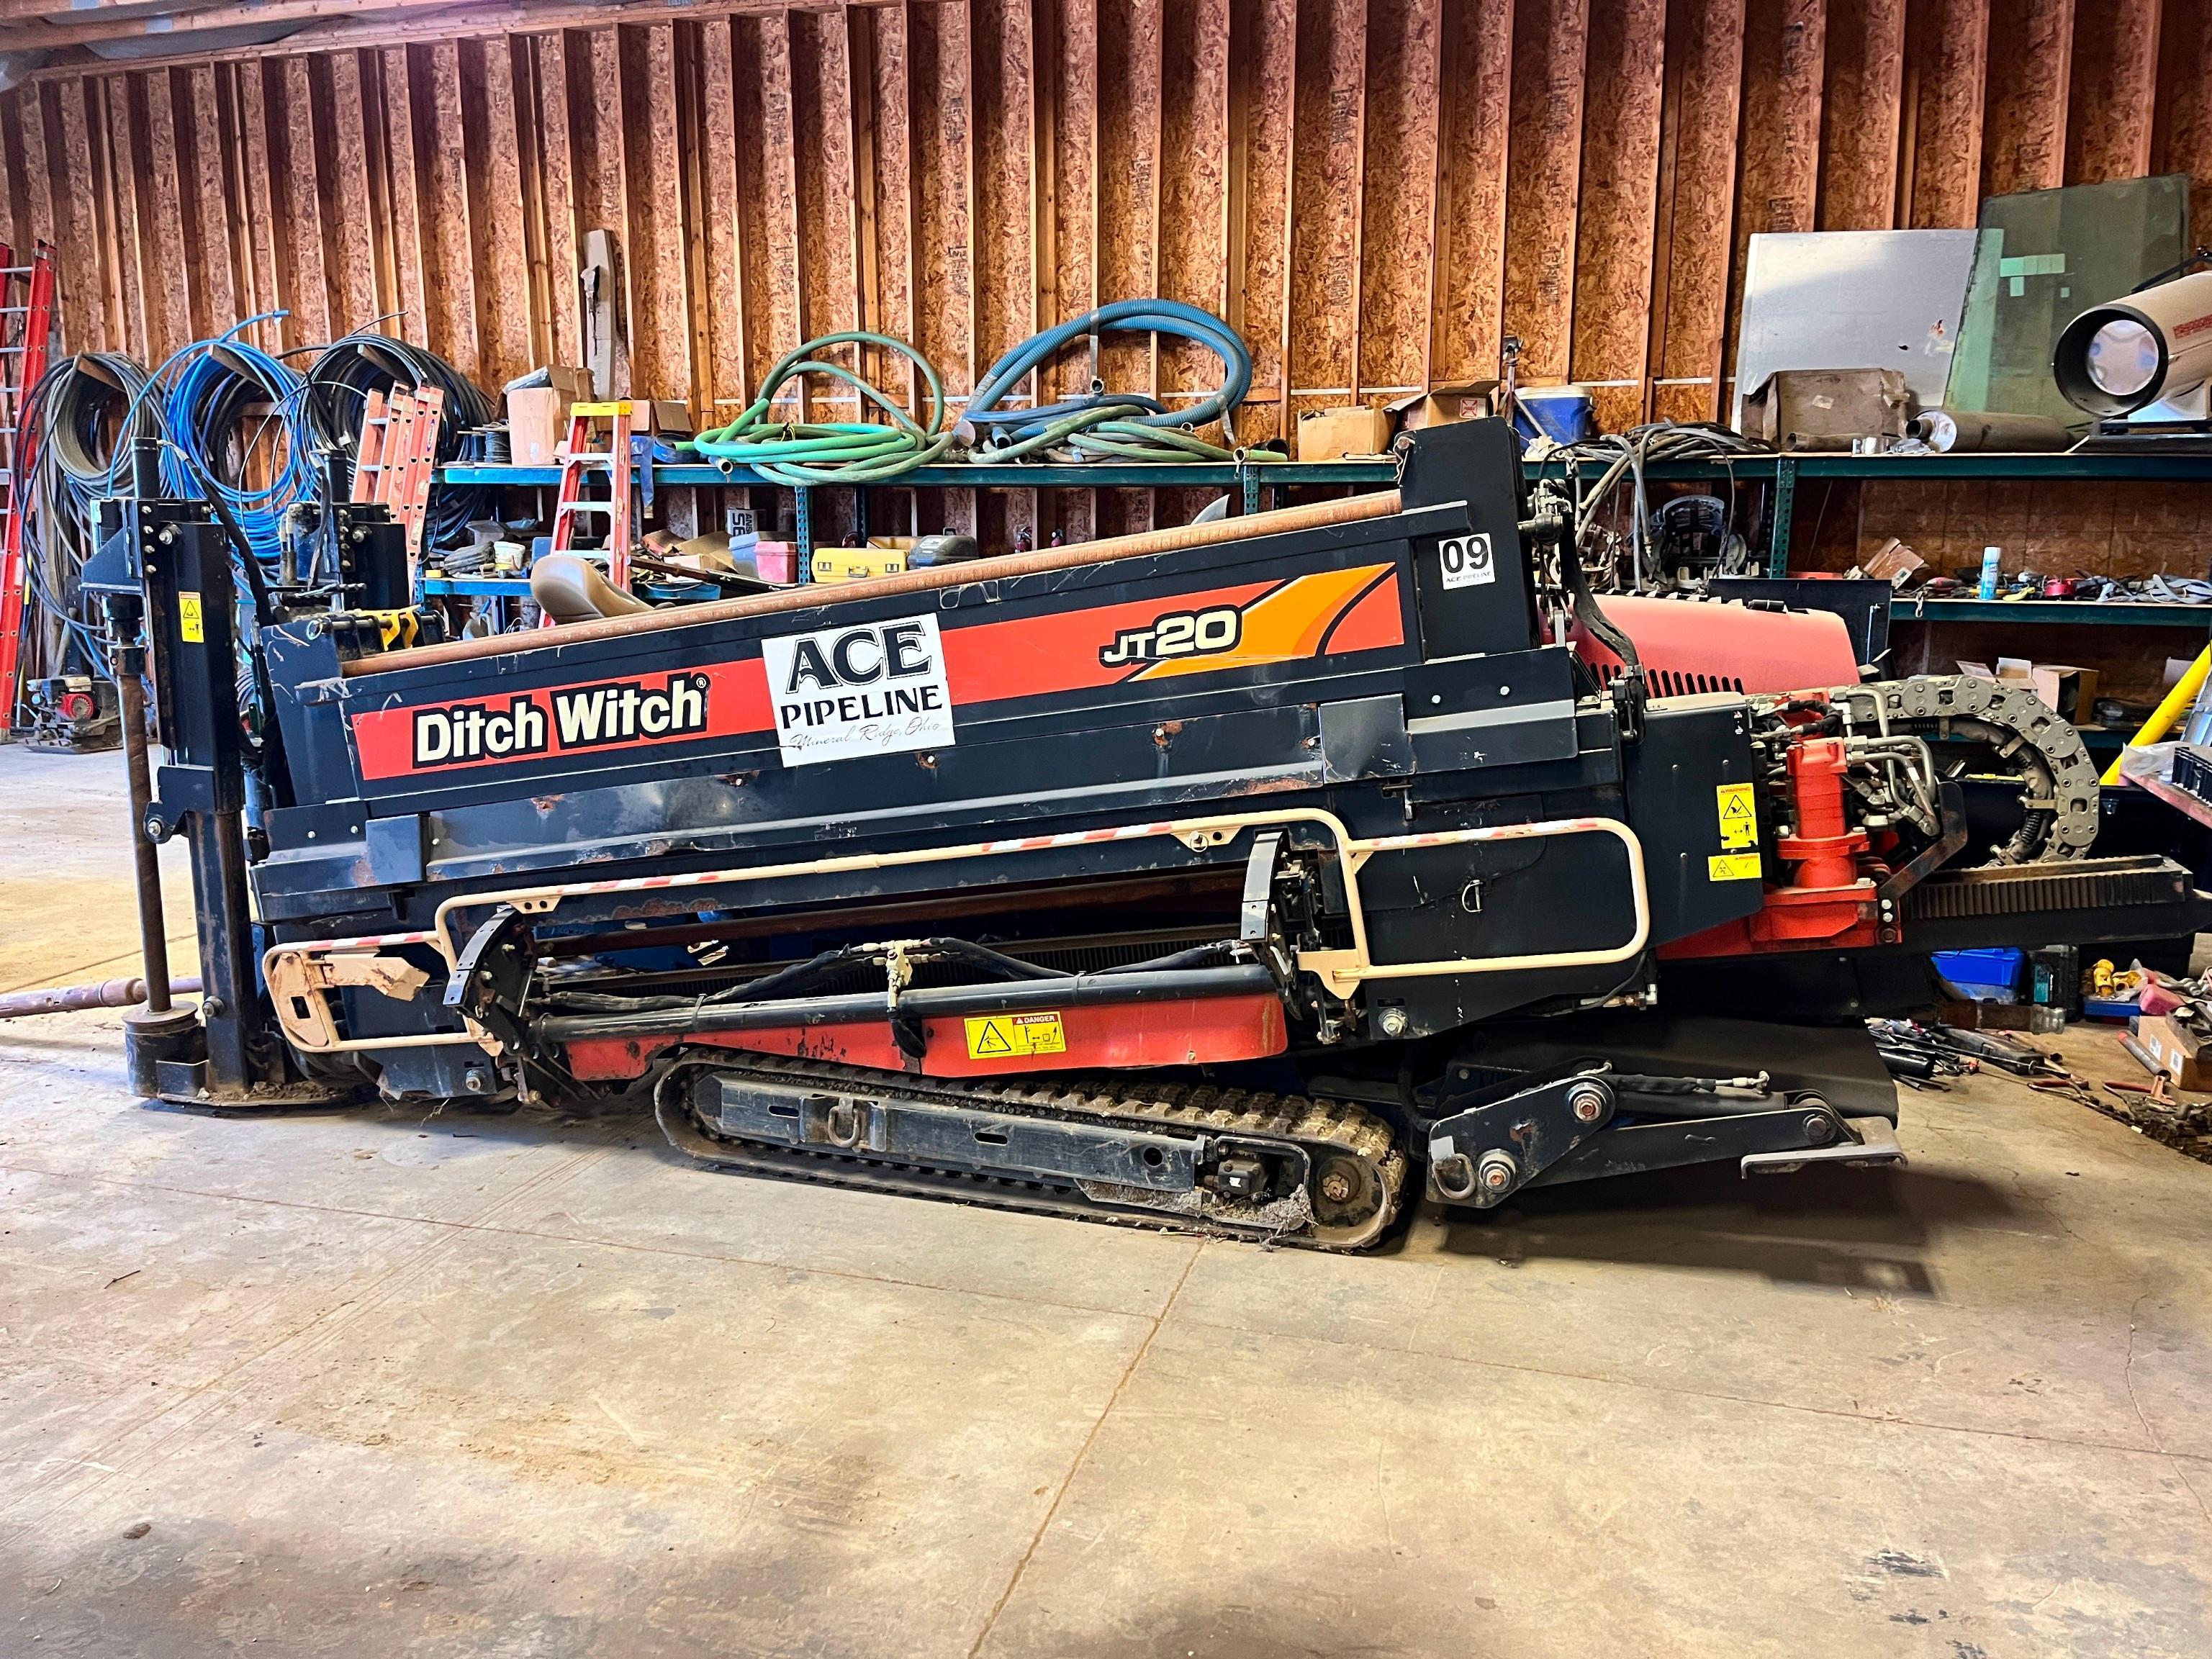 2016 DITCH WITCH JT20 HORIZONTAL DRILL SN:CMWJT20XKG0000672 powered by Deutz diesel engine, equipped